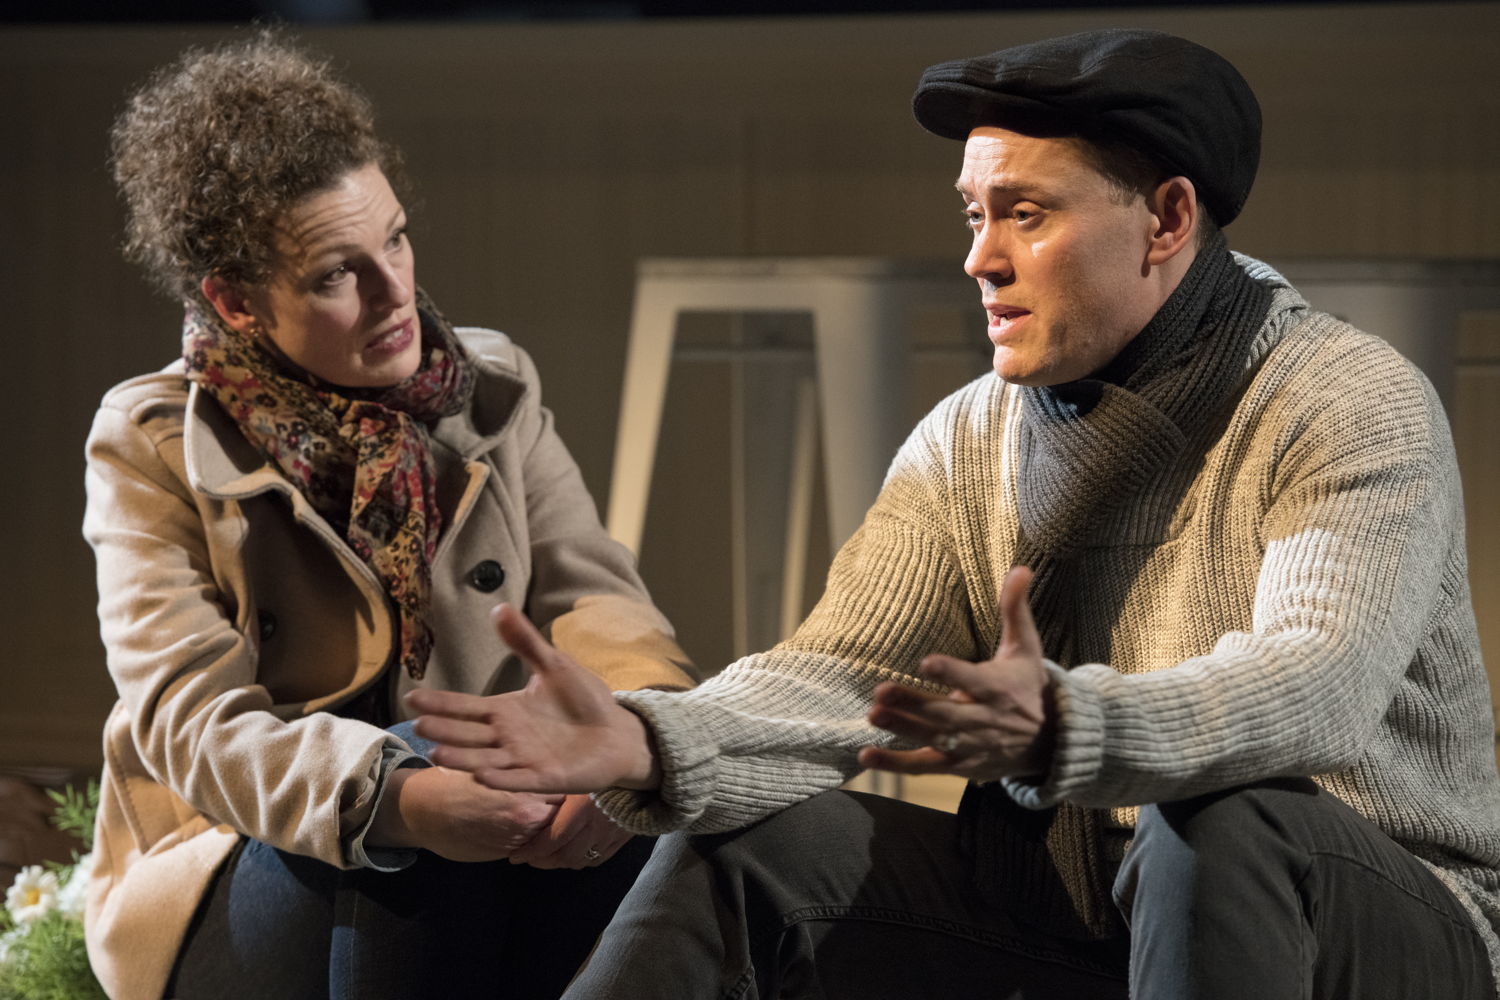 Jennifer Lines (Jane) and Craig Erickson (Tom) in Forget About Tomorrow / Photos by David Cooper